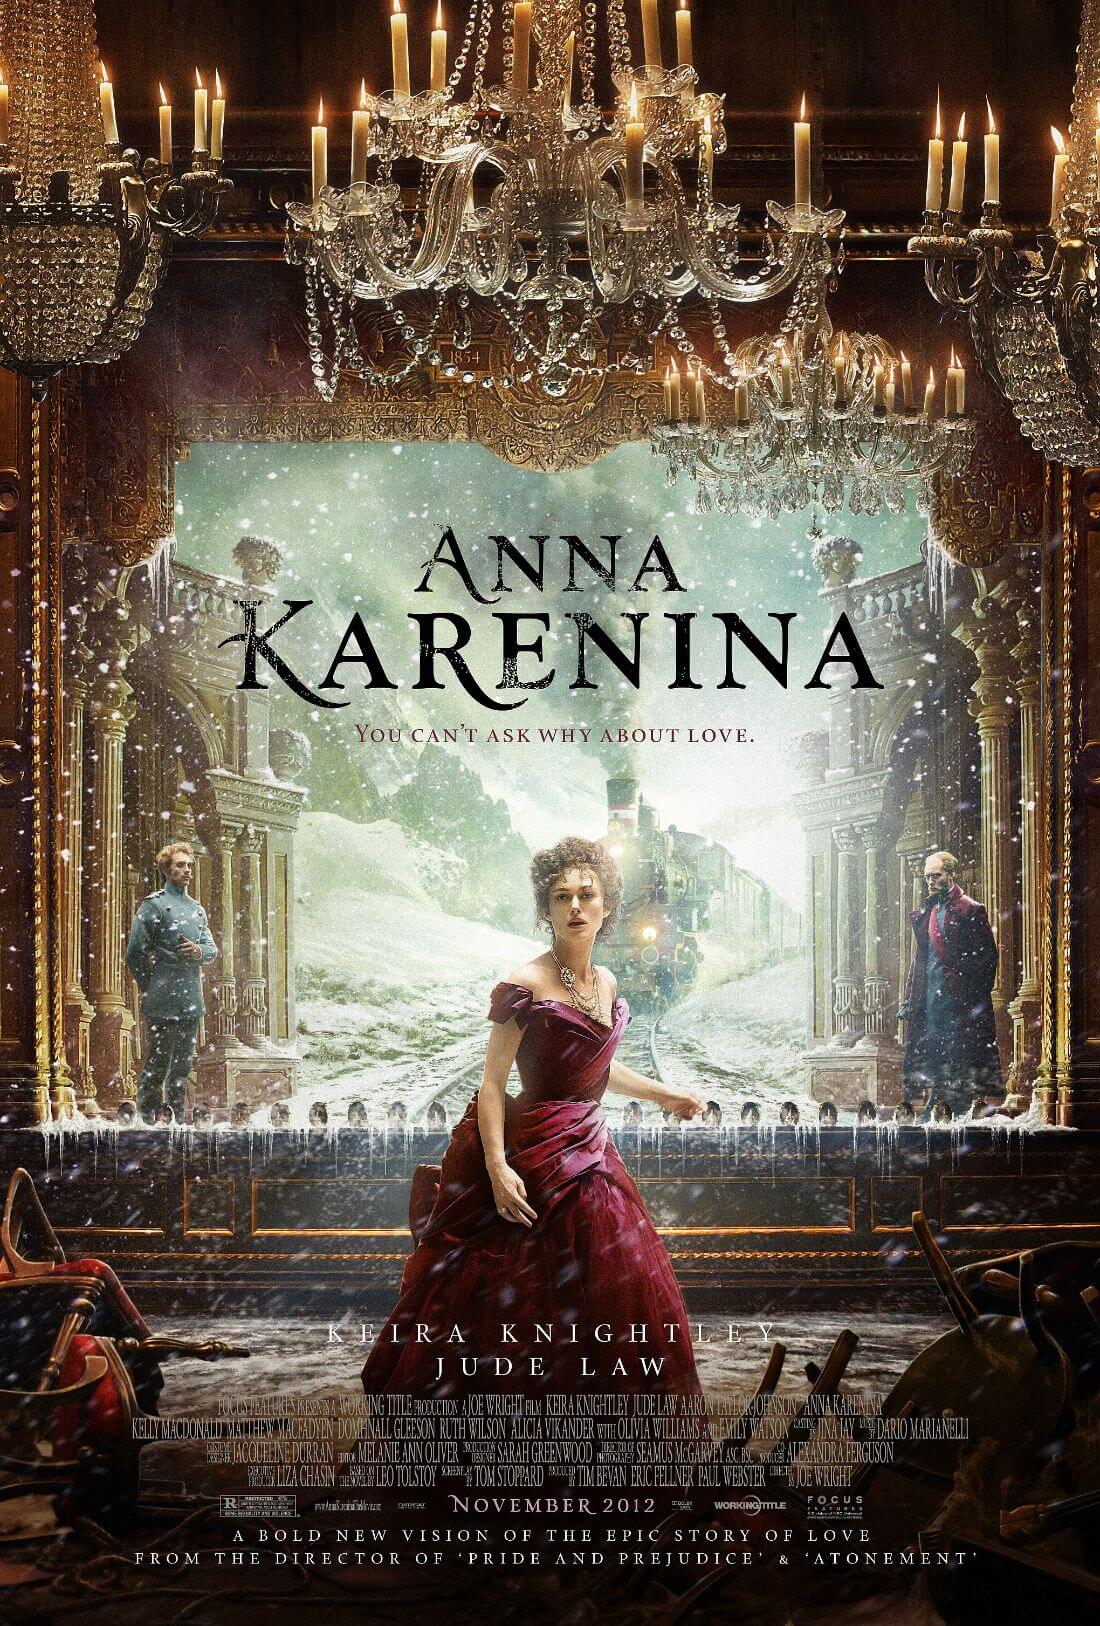 Art　Buy　Prints　Movie　by　Posters　Art　Movie　Medium　Anna　Karenina　Hollywood　Prints　Small,　Compact,　and　Classic　Canvas　Keira　Poster　Frames,　Digital　Knightley　Variants　Posters,　Large